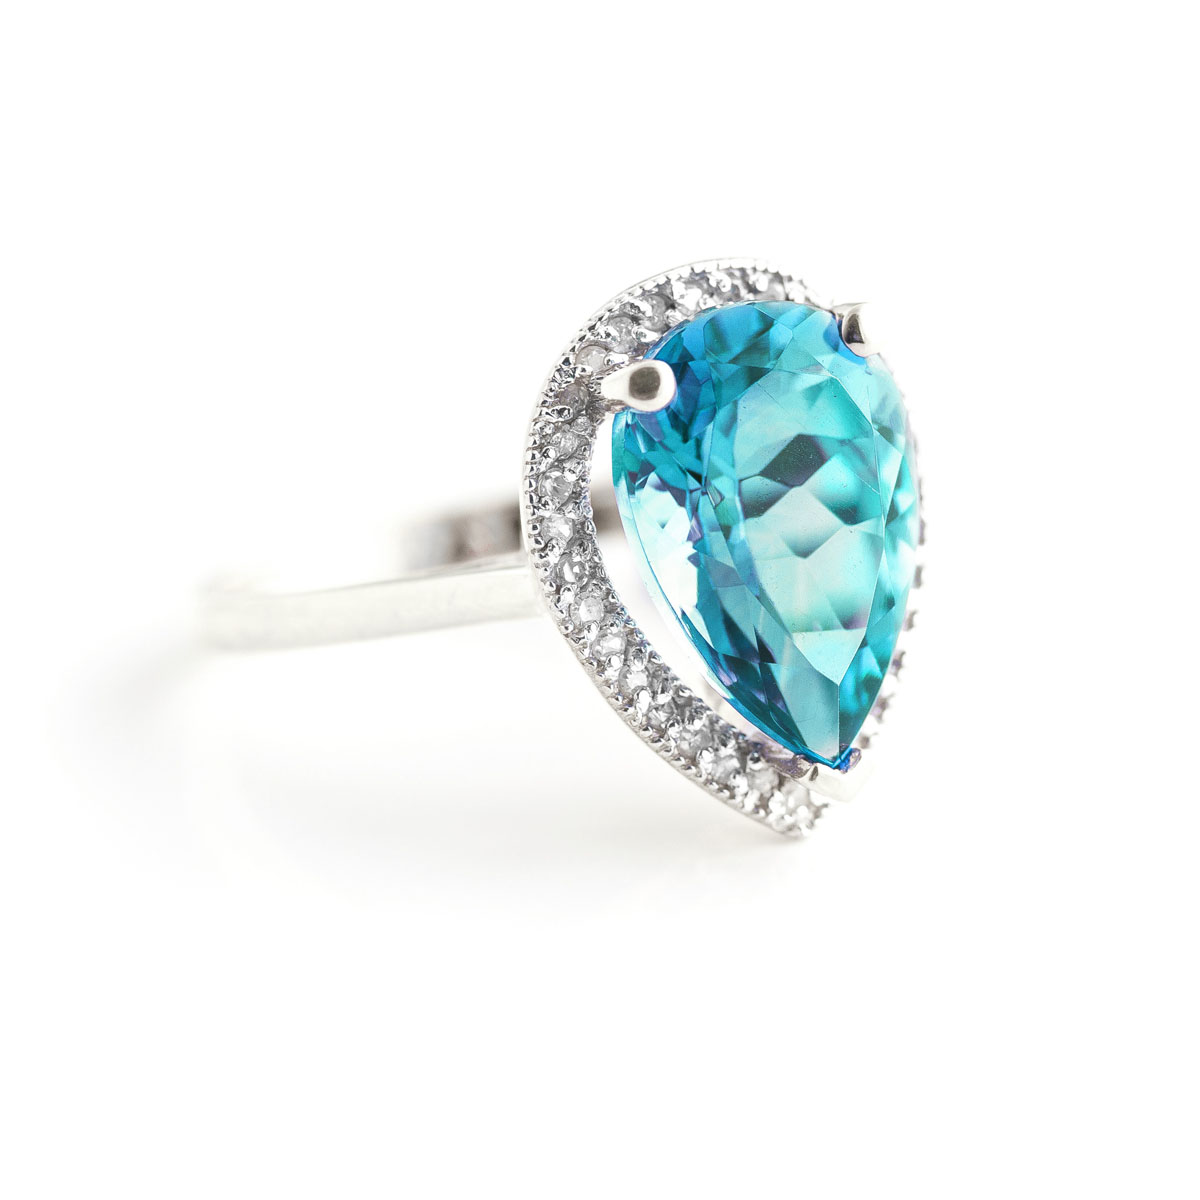 Blue Topaz Halo Ring 4.66 ctw in 9ct White Gold